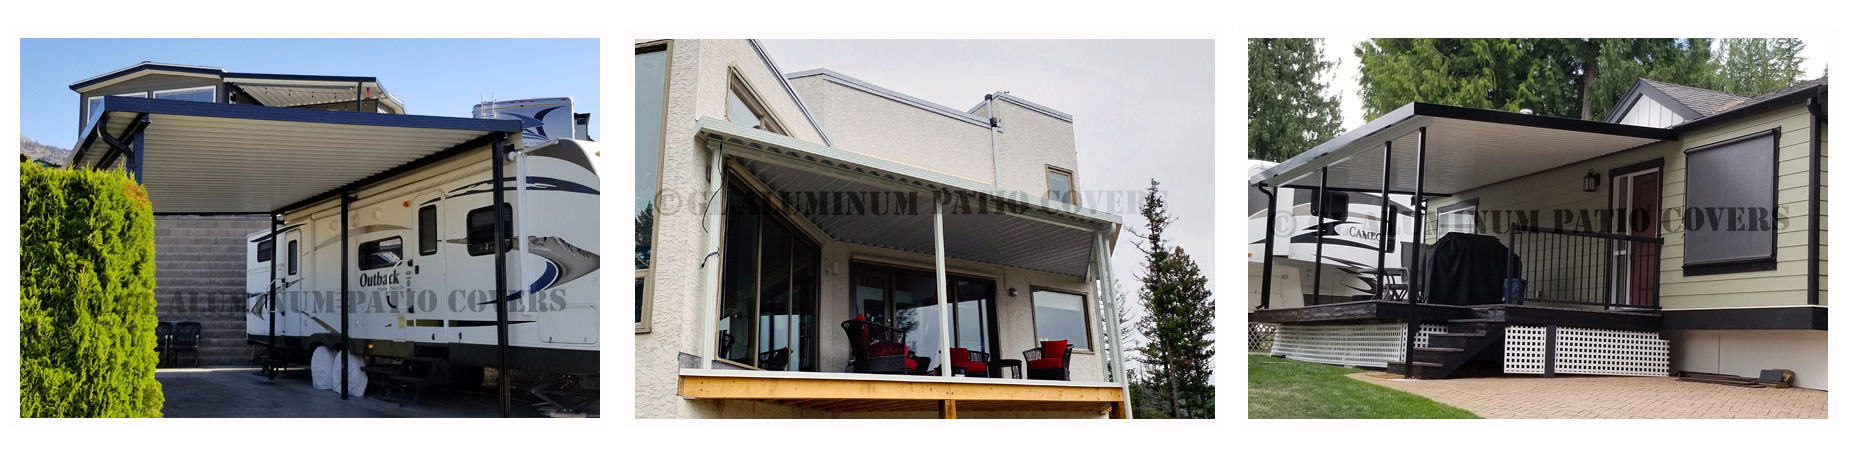 How to measure for your new patio cover from GL Aluminum.